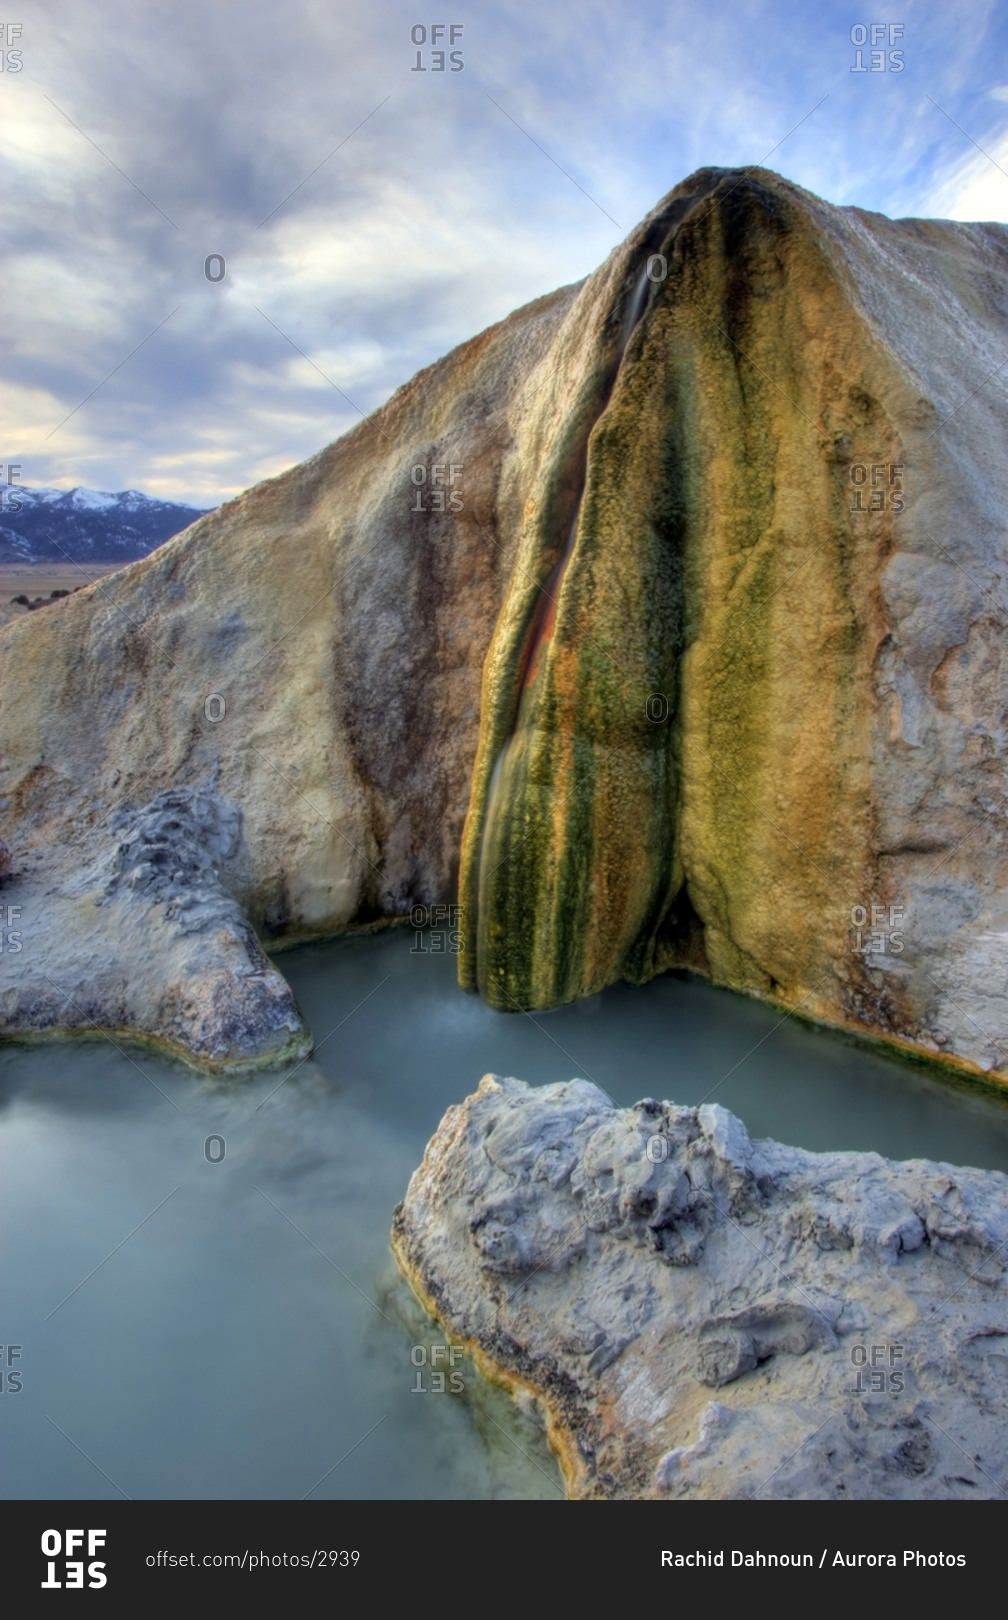 The Travertine Hot Springs are natural hot springs located outside the town of Bridgeport, CA